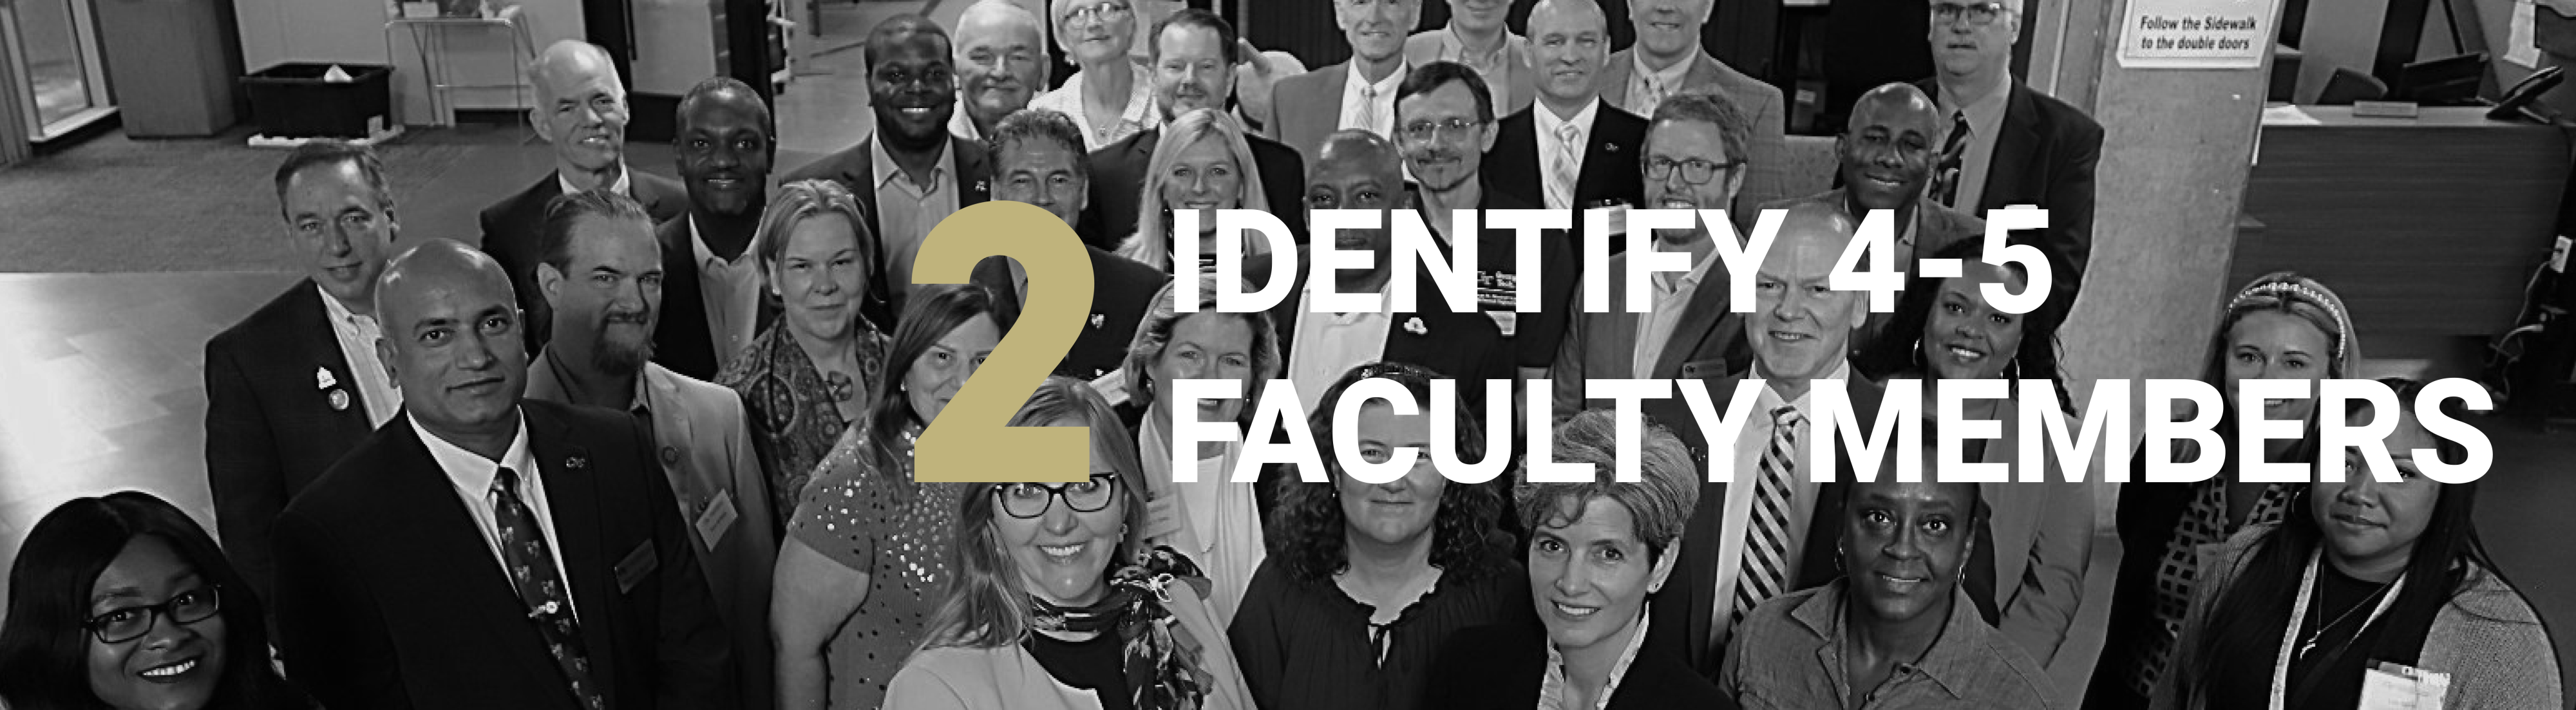 Step 2: Identify 4-5 faculty members image